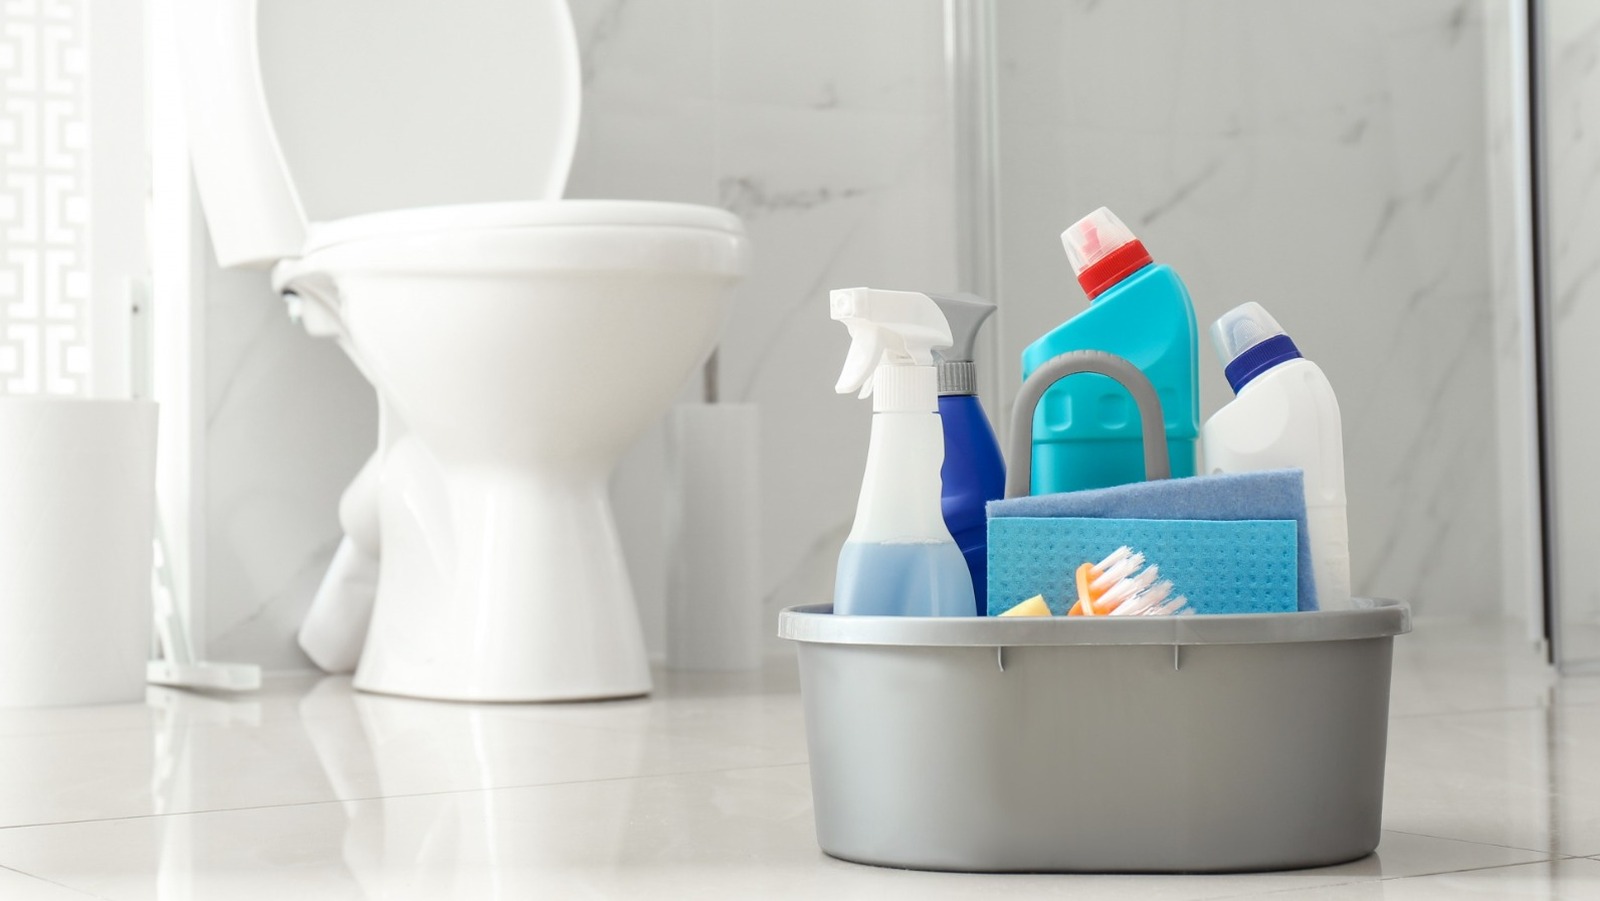 https://www.housedigest.com/img/gallery/the-dangers-of-using-toilet-bowl-cleaners/l-intro-1648742922.jpg